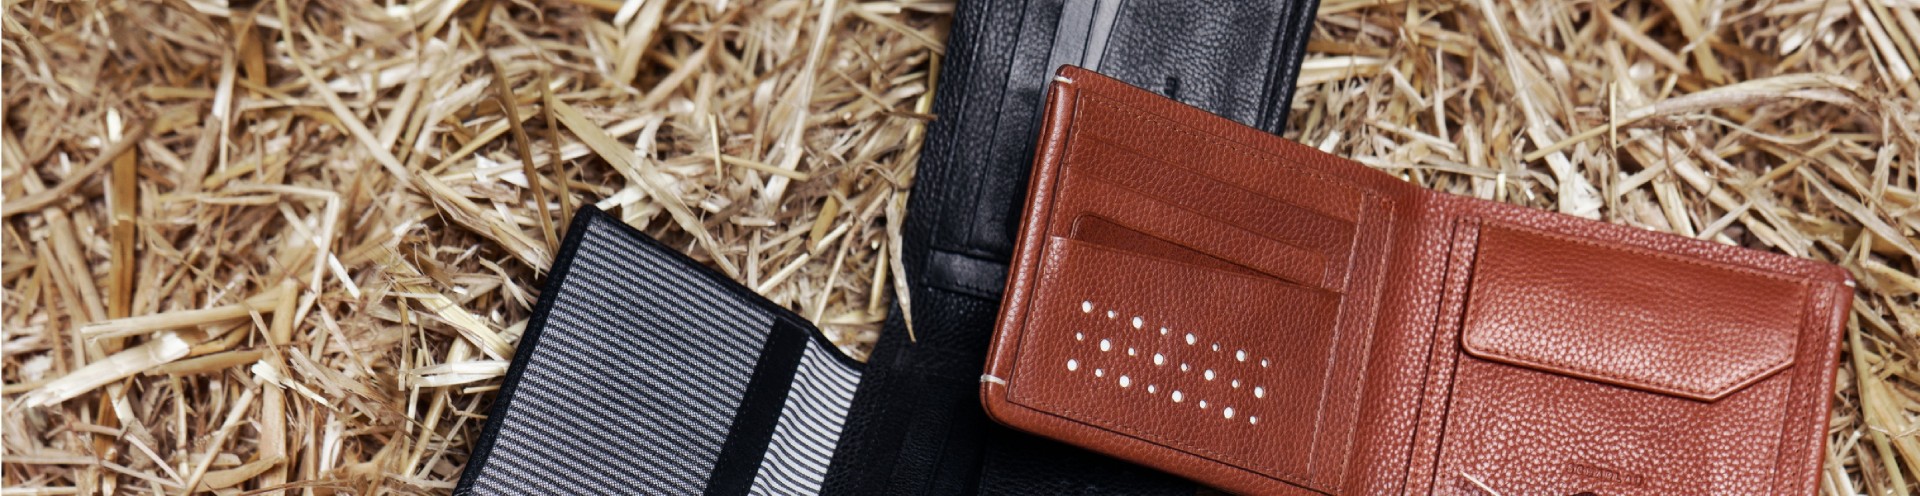 Men’s Small Leather Goods High Quality